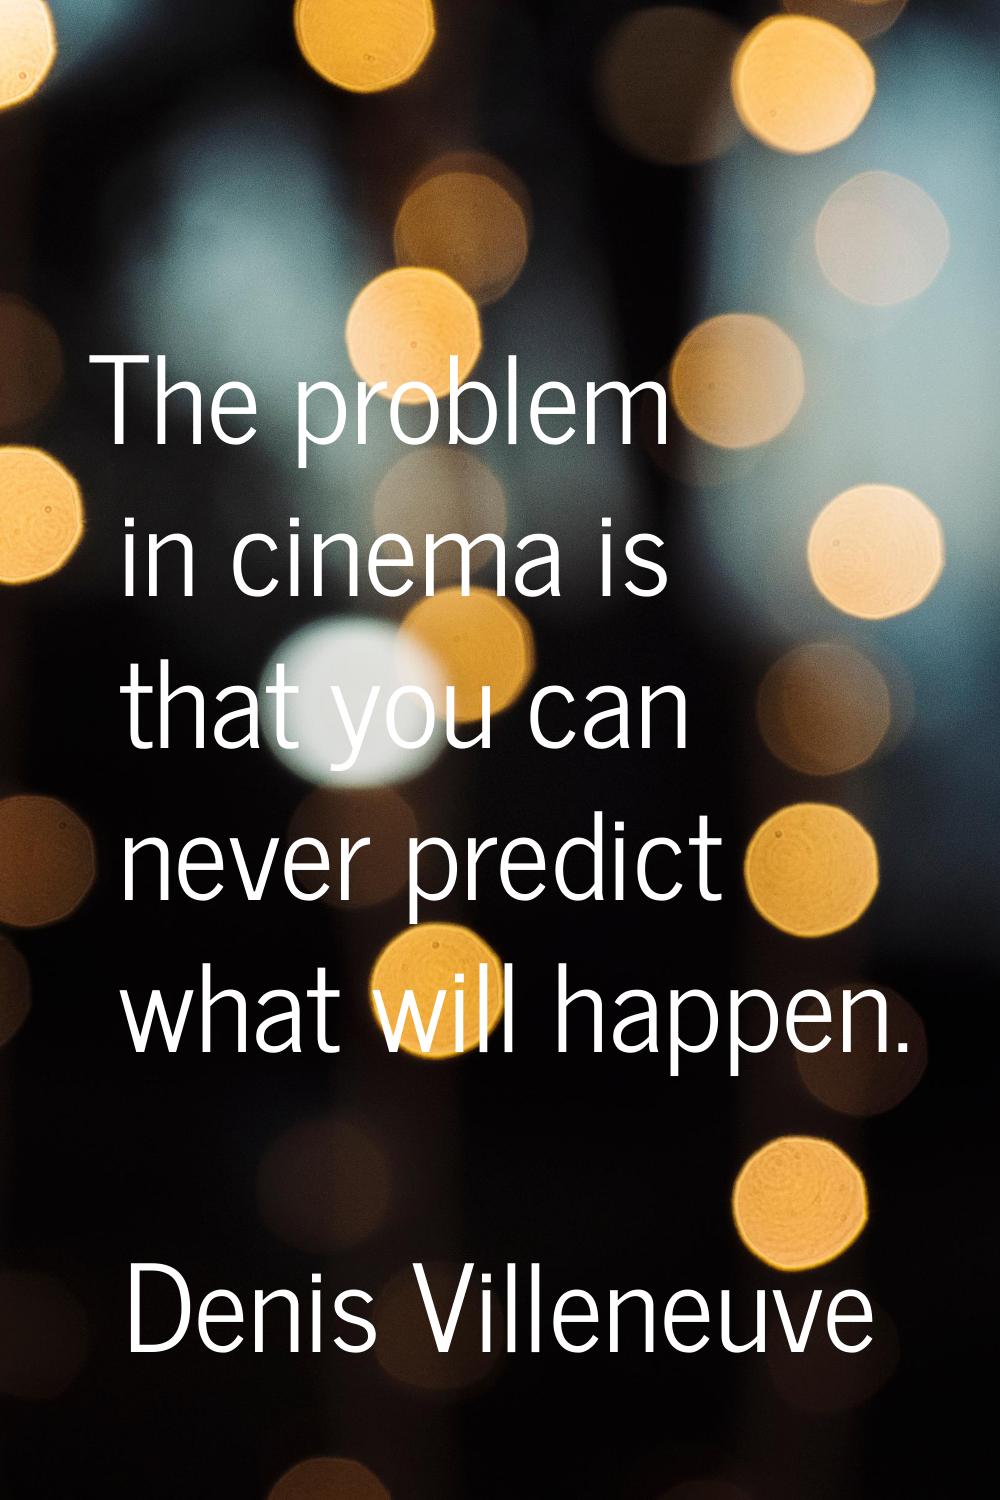 The problem in cinema is that you can never predict what will happen.